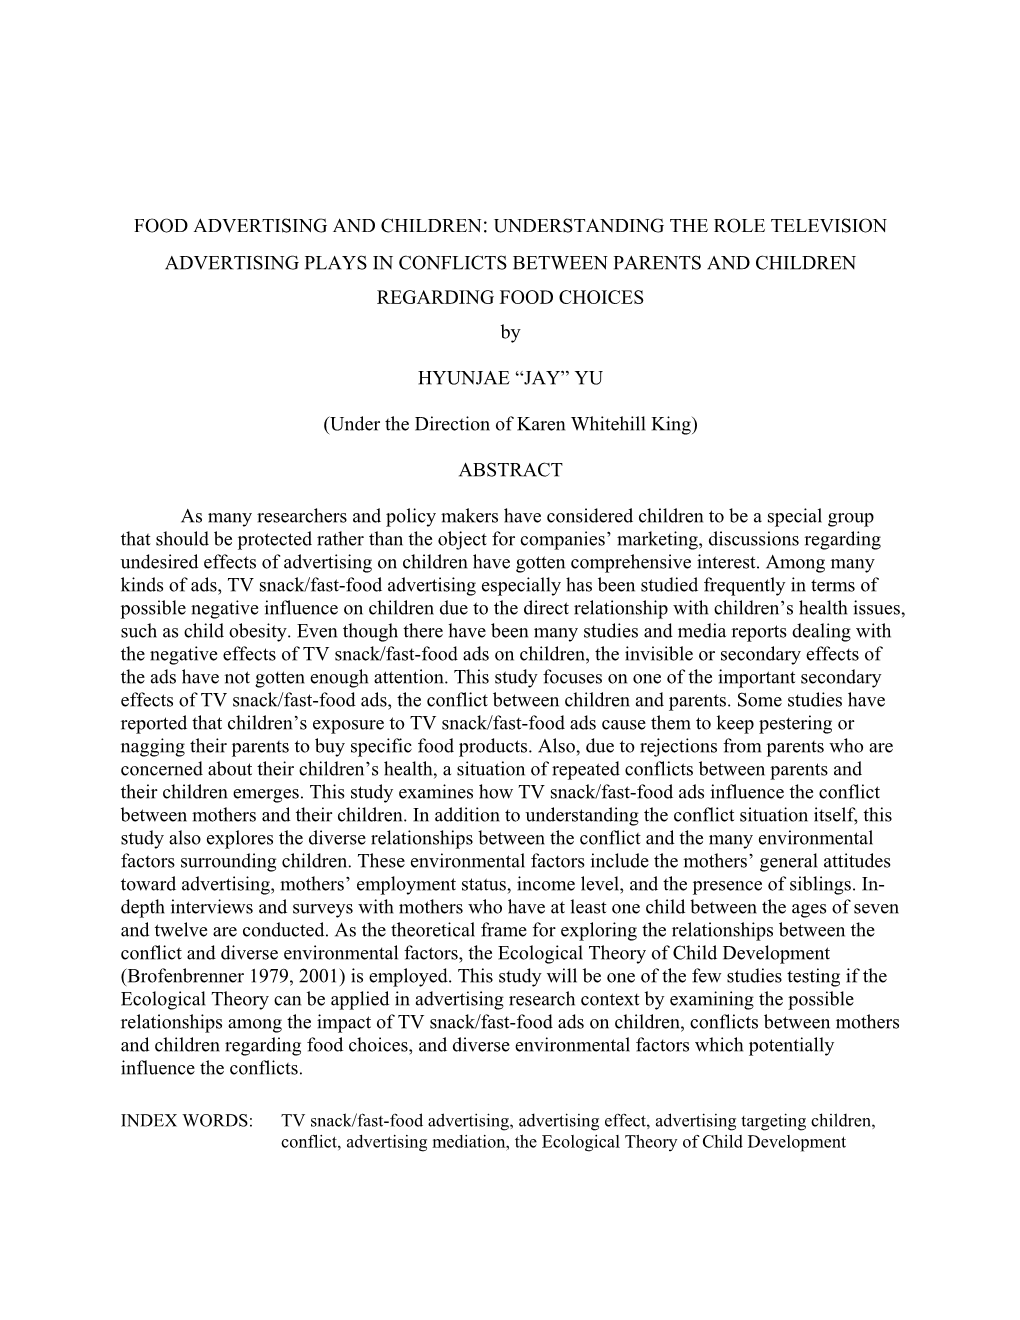 FOOD ADVERTISING and CHILDREN: UNDERSTANDING the ROLE TELEVISION ADVERTISING PLAYS in CONFLICTS BETWEEN PARENTS and CHILDREN REGARDING FOOD CHOICES By